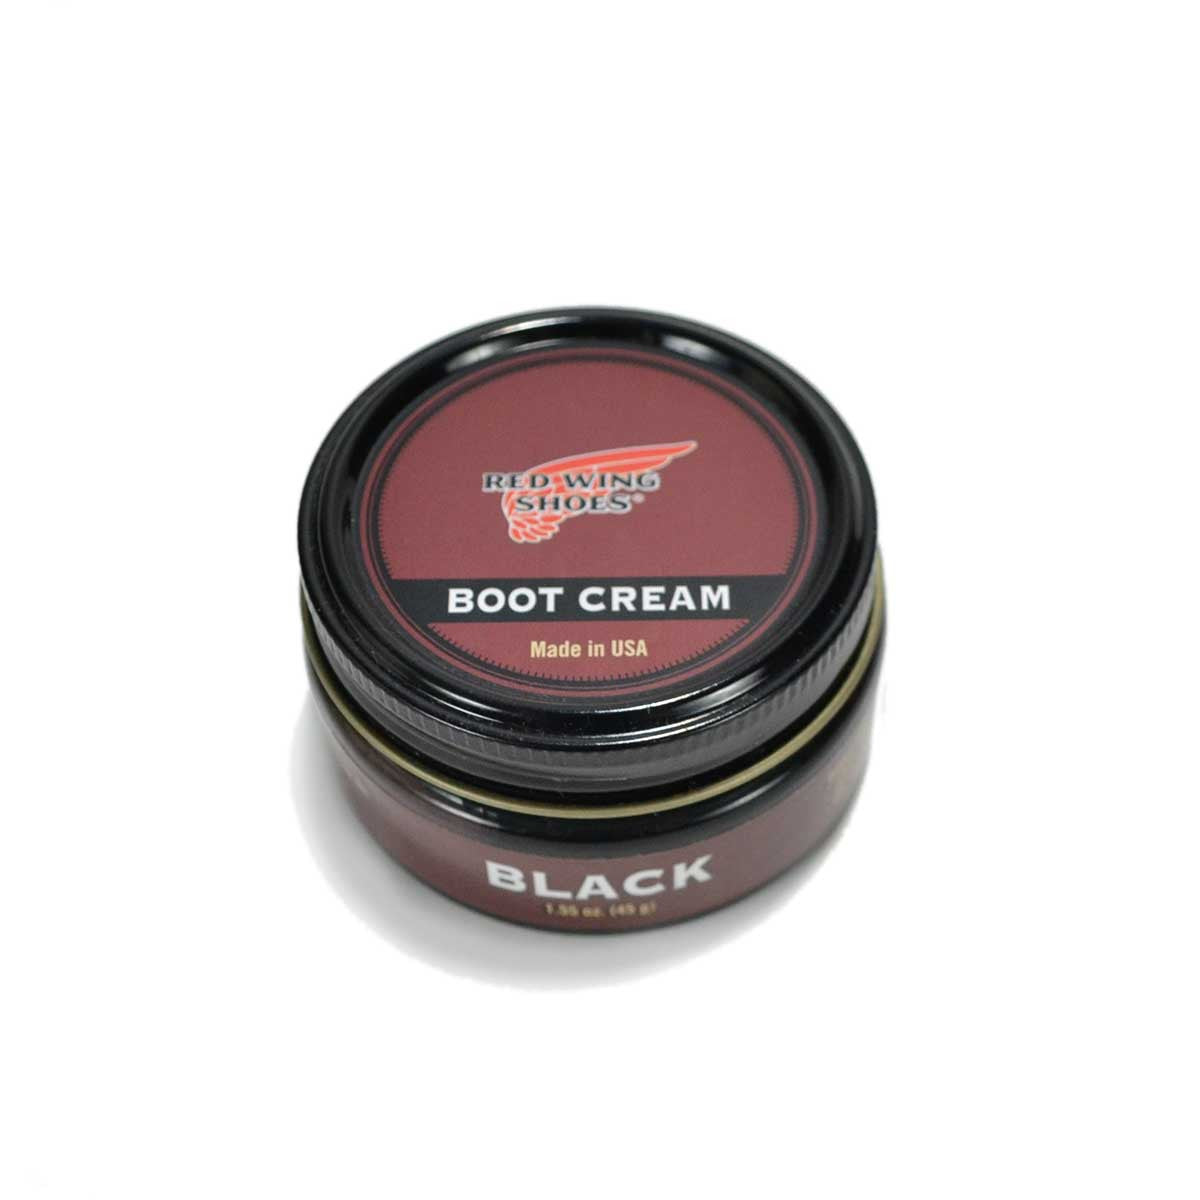 RED WING BOOT CREAM BLACK Reserve Supply Company